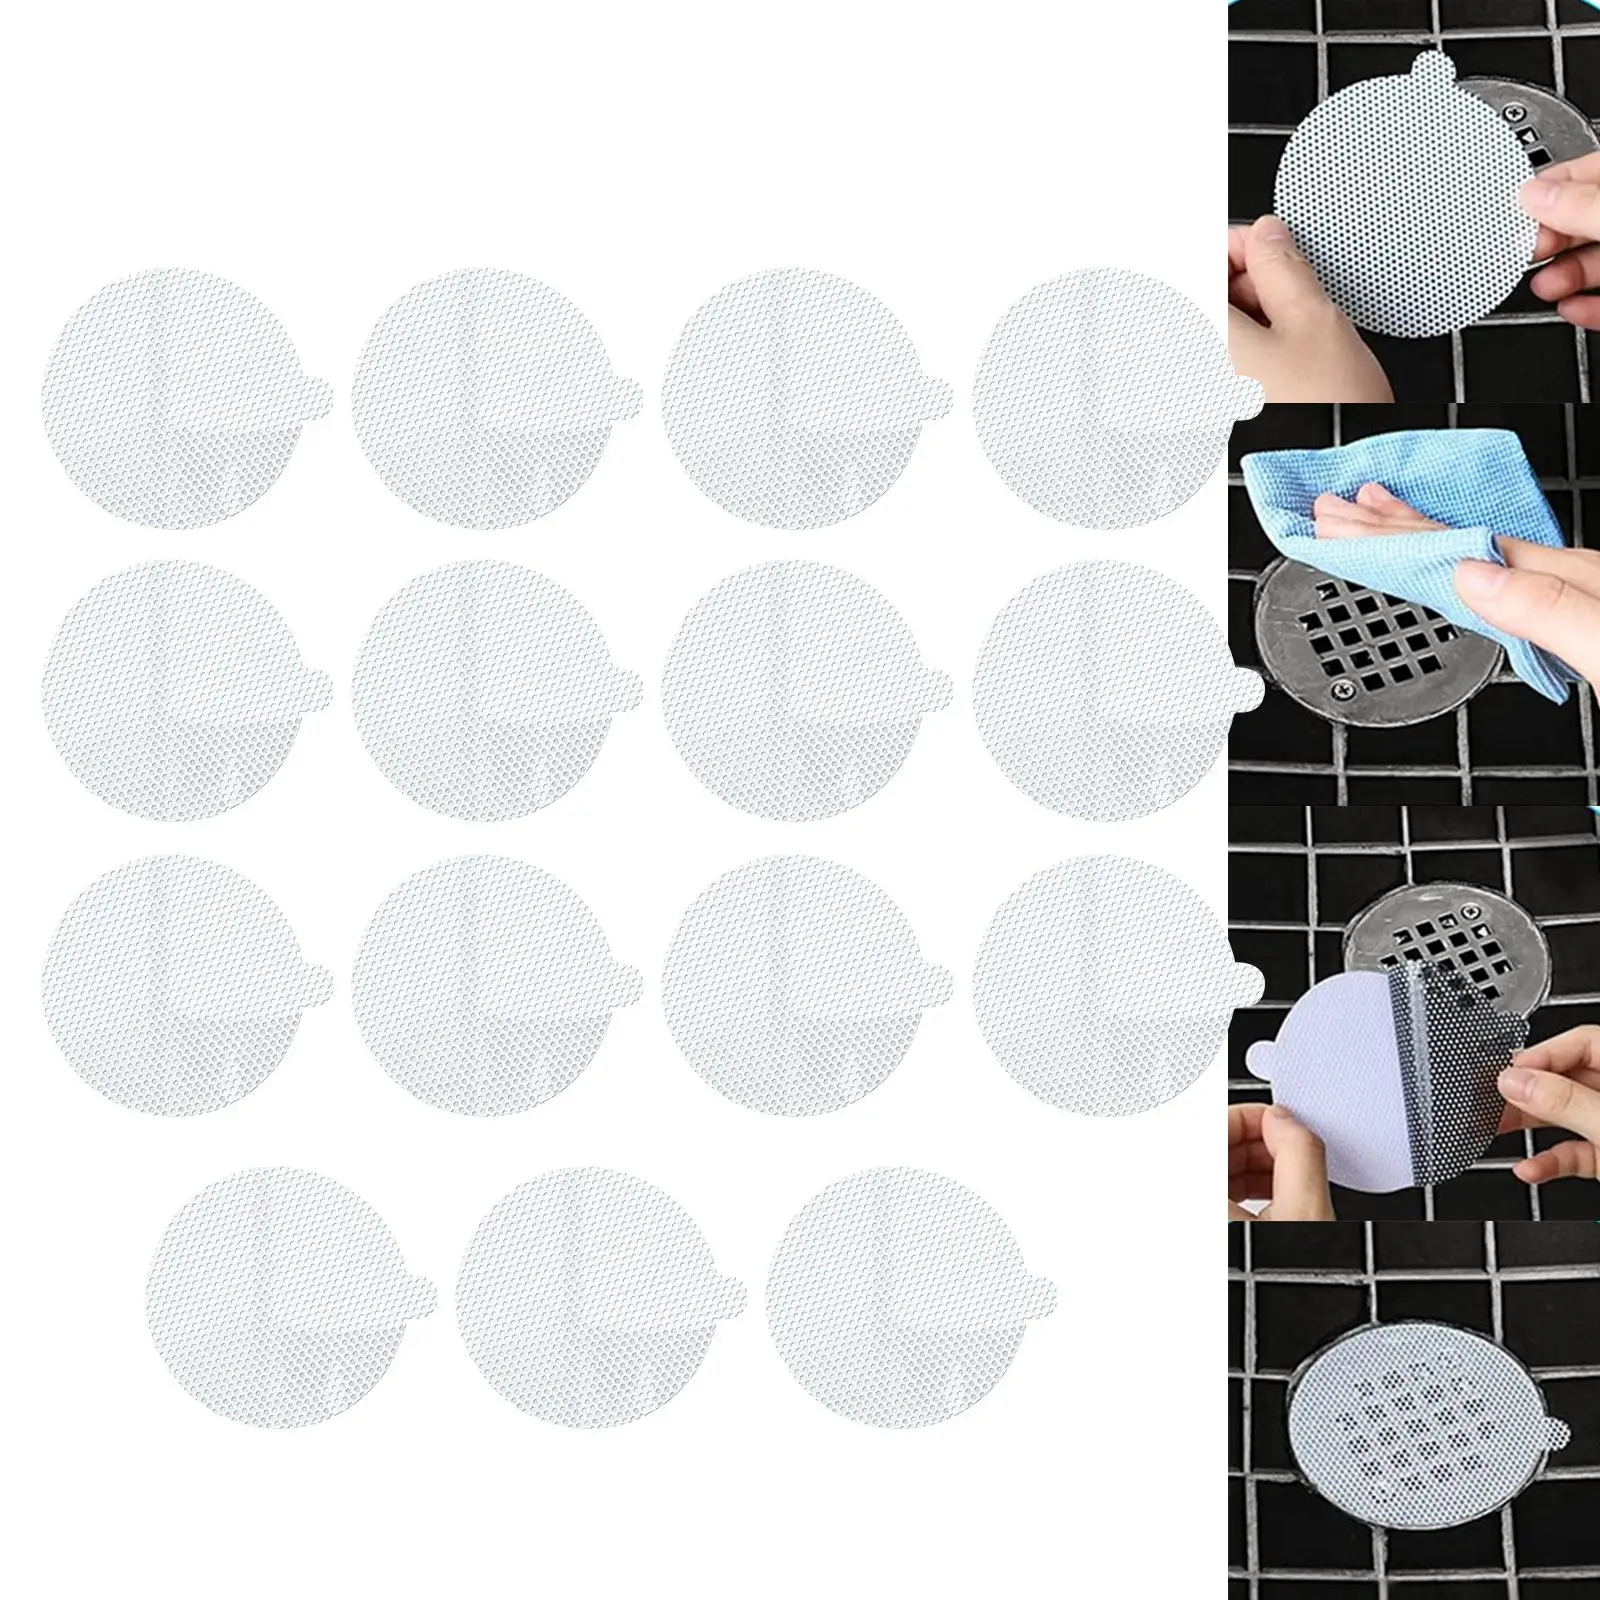 15 Pieces Round Disposable Shower Drain Catcher Collector Strainers Cover for Floor Drain Bathroom Sink Laundry Bathtub